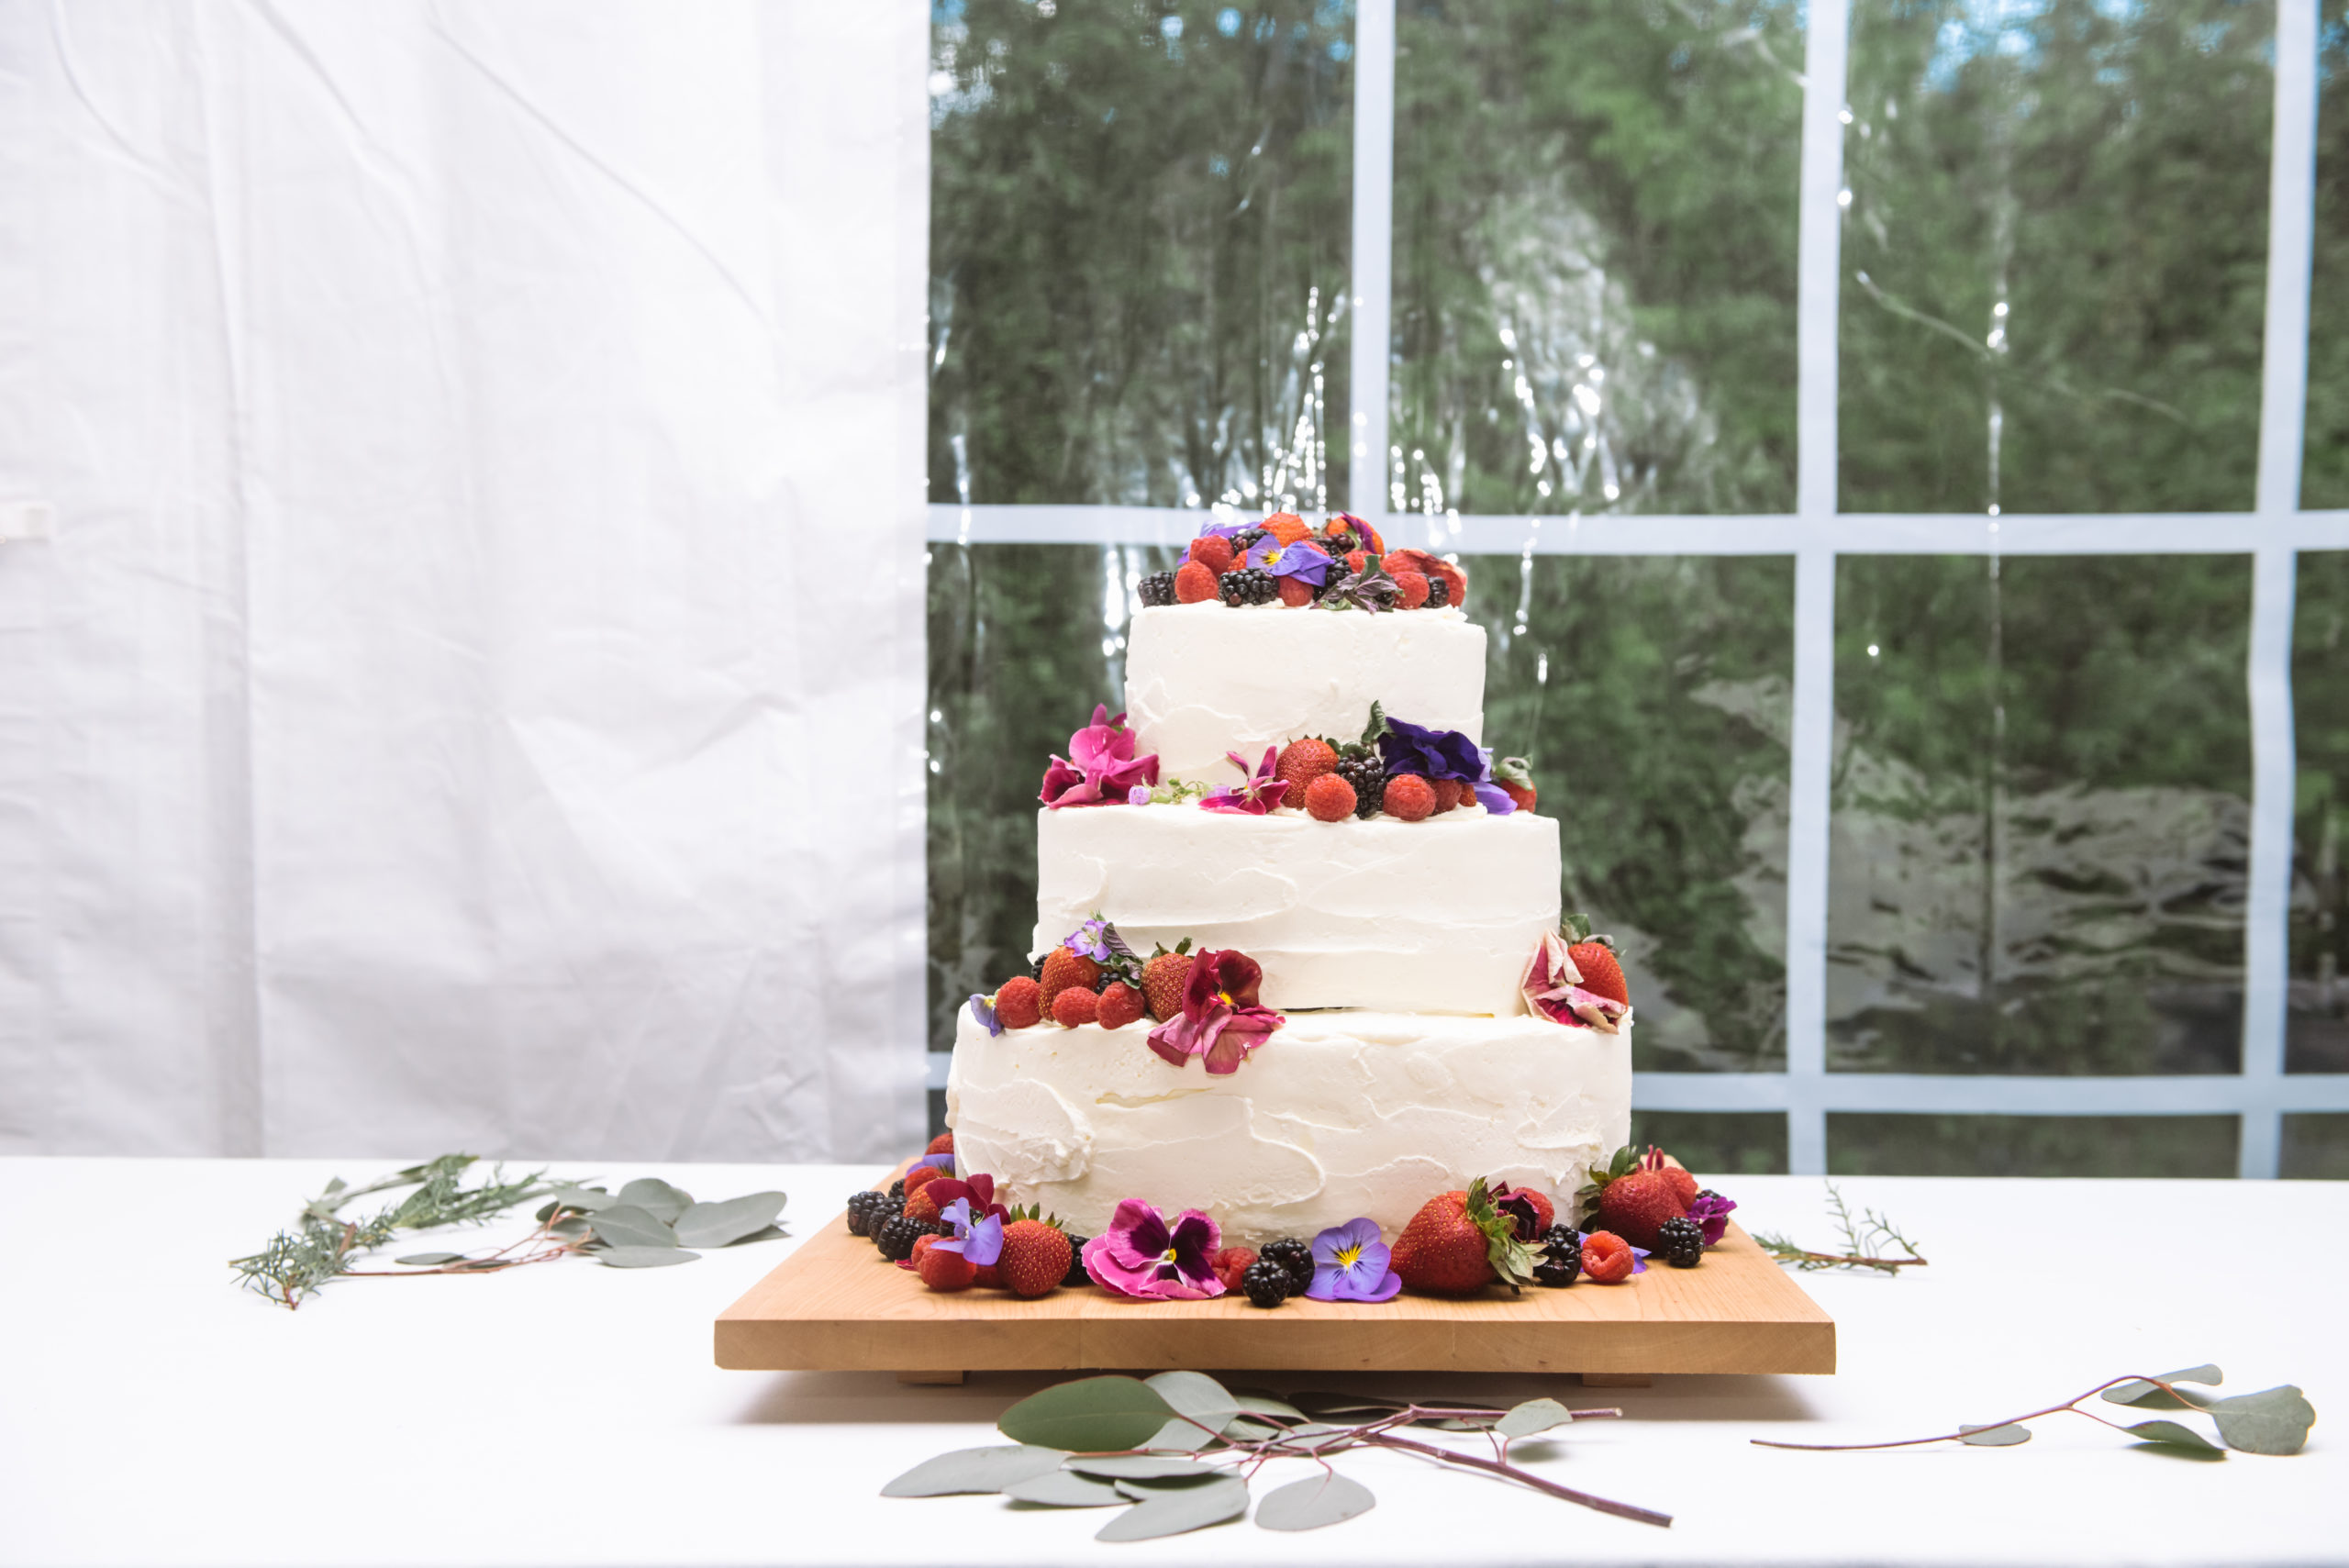 Three-tiered white cake adorned with fresh raspberries, strawberries, blackberries, and pink and purple flowers. The cake is on a square wooden cake stand and there is some greenery around the cake. It is set on a white tablecloth and it is within a white tent.